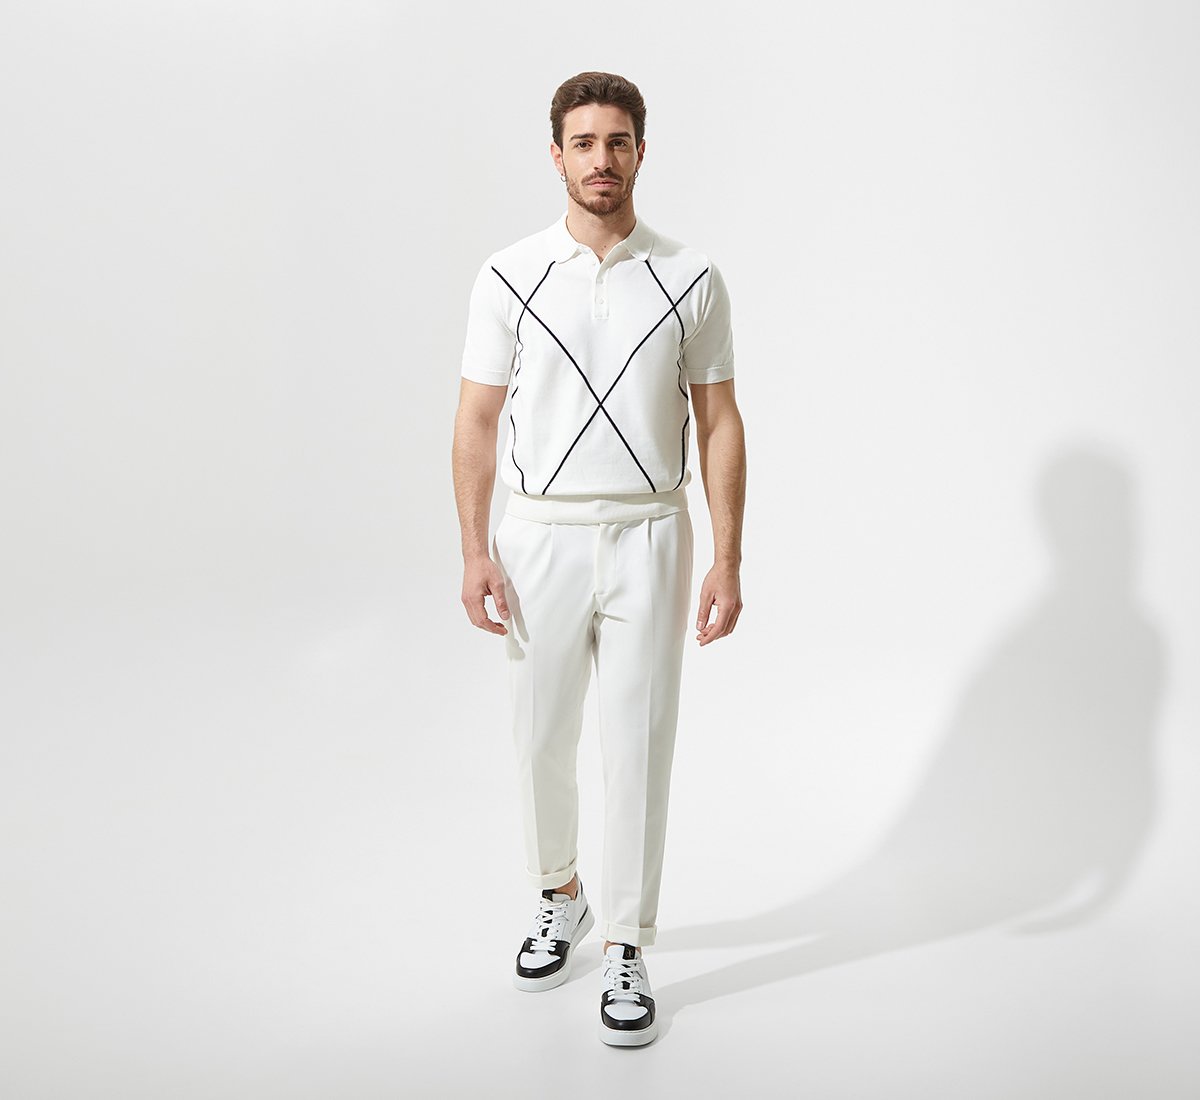 Structured white trousers